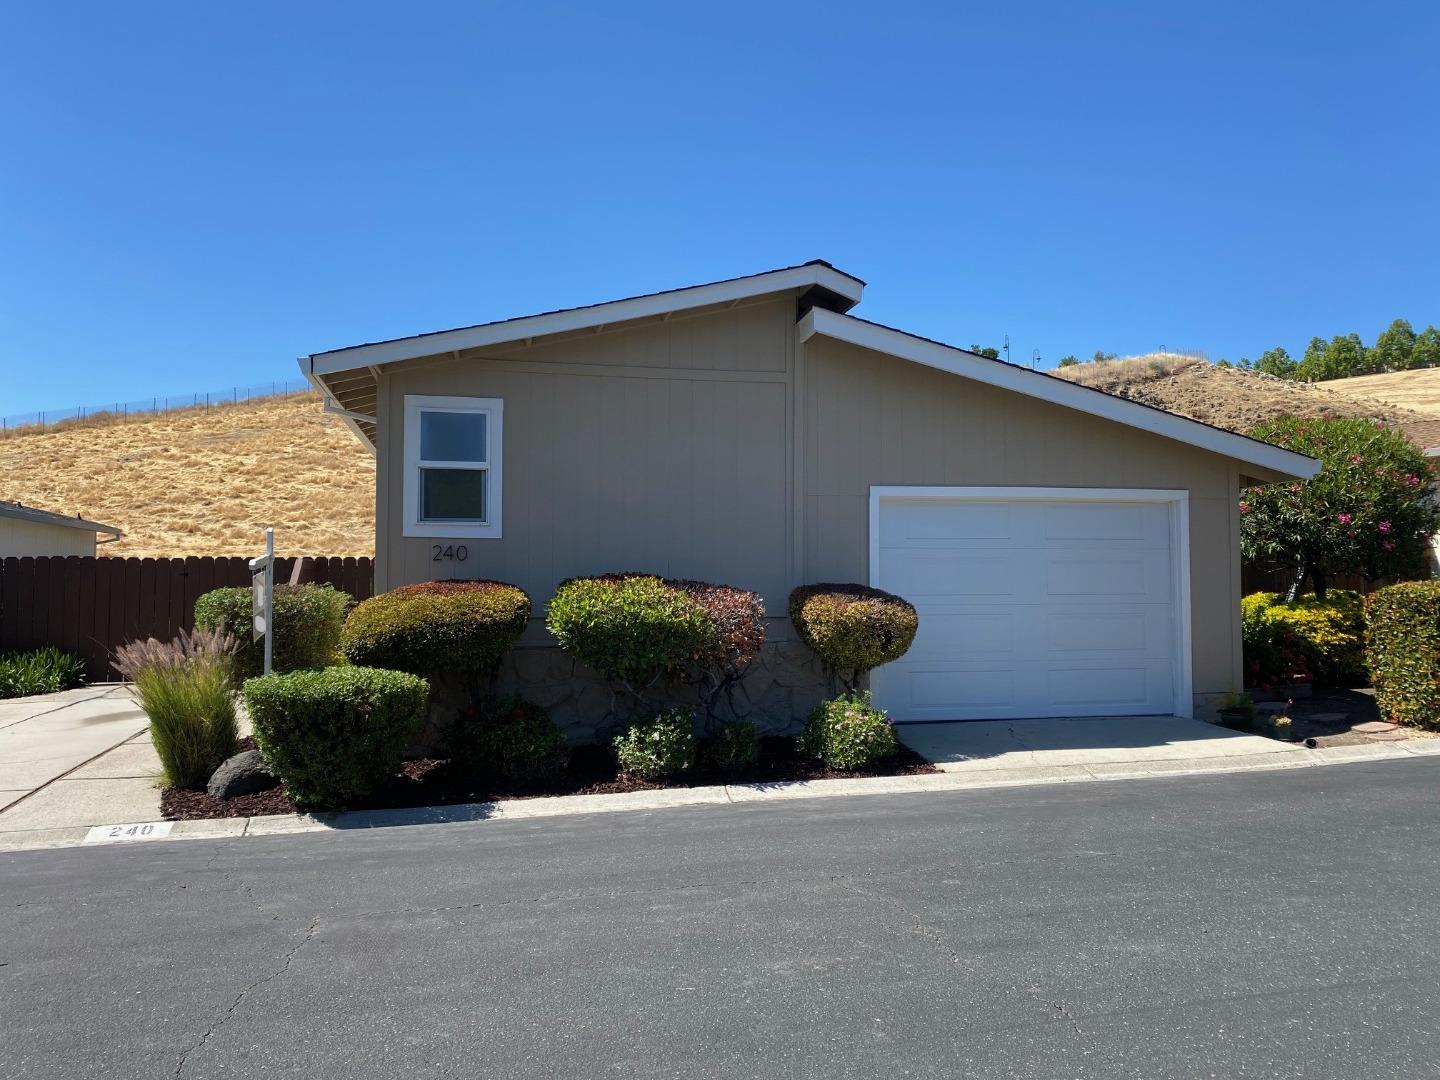 Photo of 240 Mountain Springs Dr in San Jose, CA